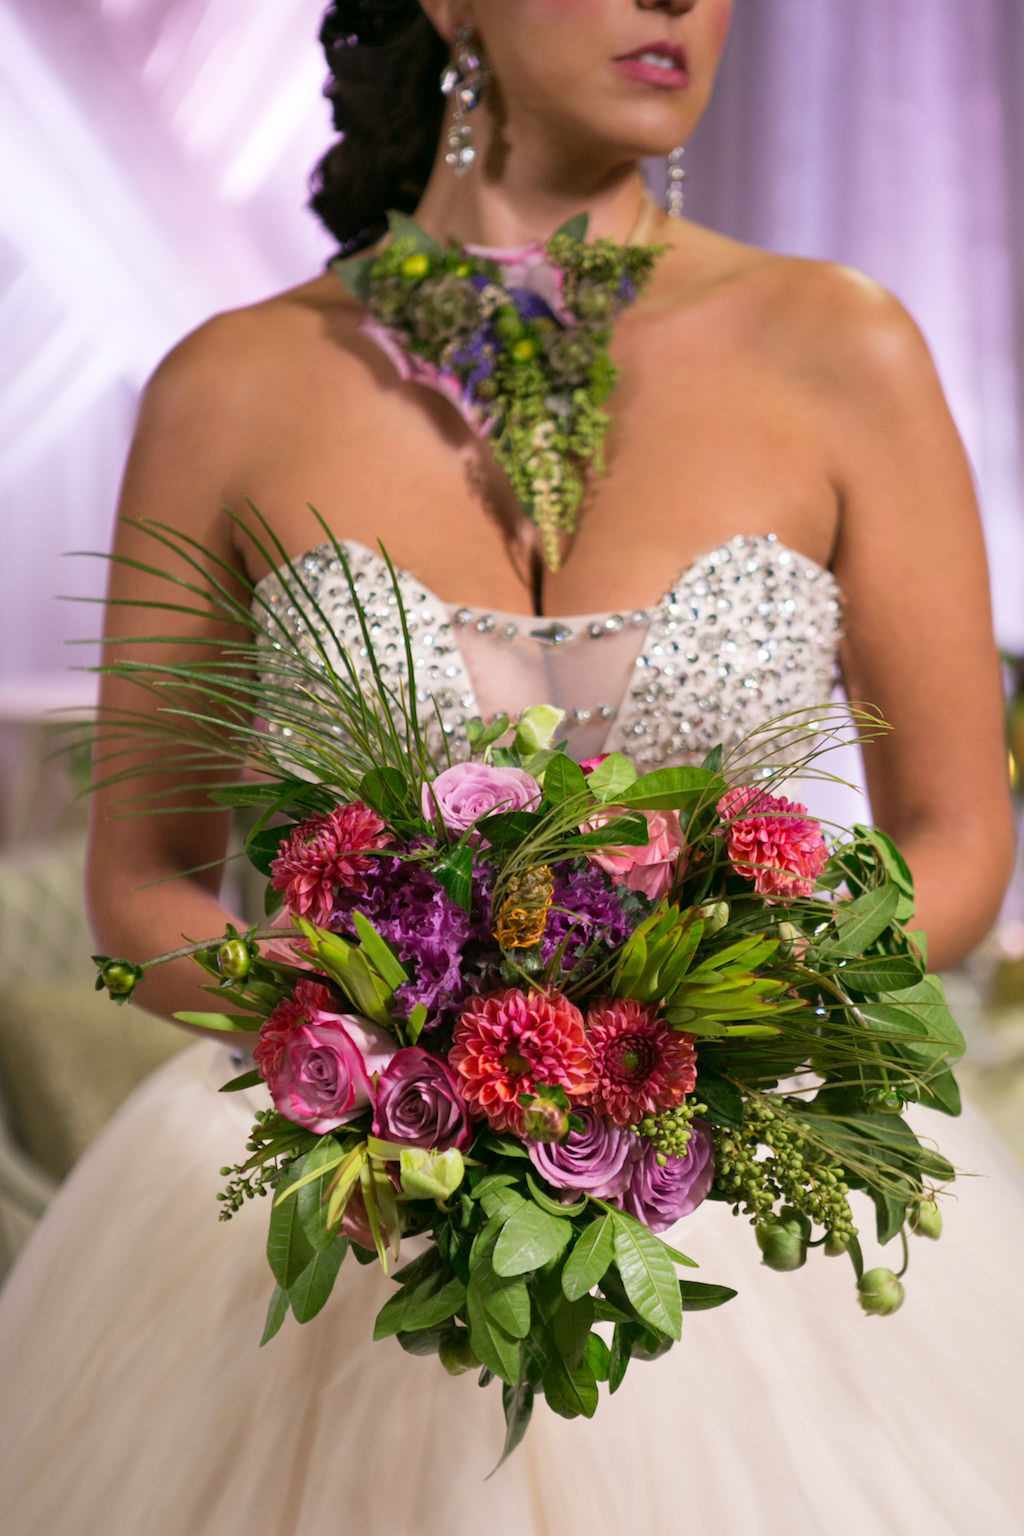 Tropical Wedding Bouquet with Greenery, Purple Roses and Pink Florals | Beaded Sweetheart Ballgown Wedding Dress from Tampa Bay Bridal Shop Truly Forever Bridal | Tampa Bay Wedding Photographer Carrie Wildes Photography